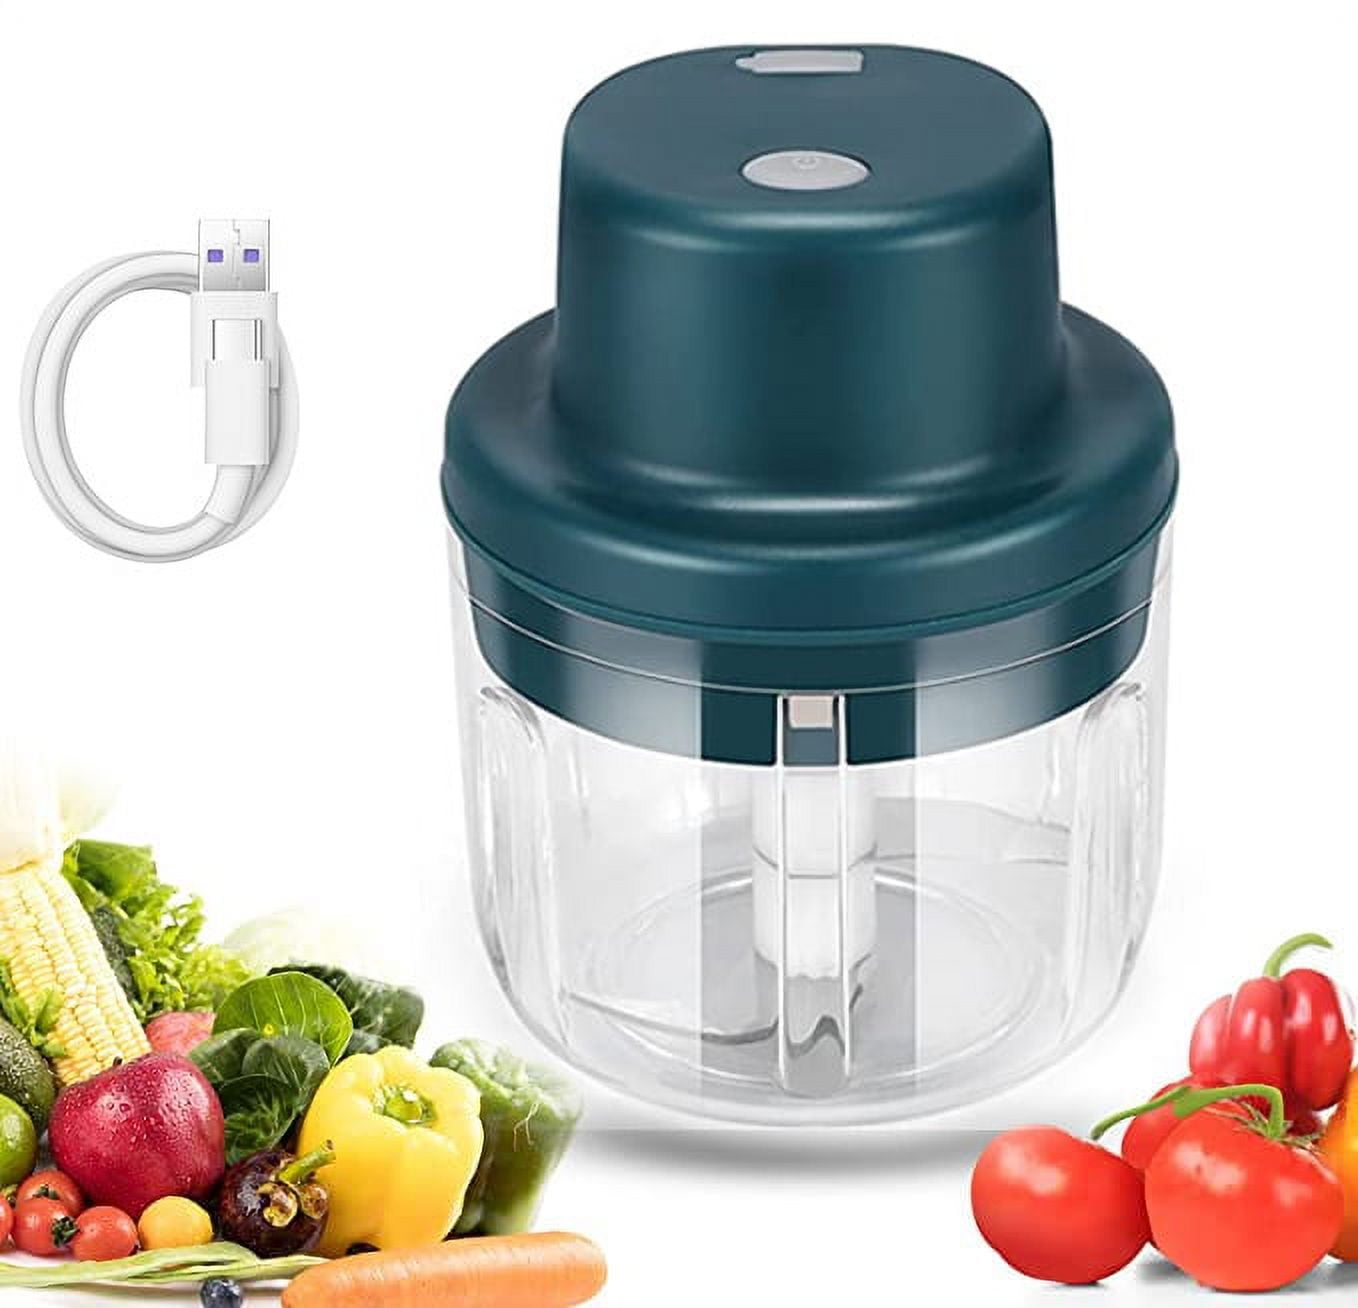  Rae Dunn Electric Mini Garlic Chopper,USB Rechargeable,  Portable Cordless Wireless Food Chopper,8 oz Small Food Processor for  Chopping Garlic, Ginger, Herbs, Chili, Minced Meat, Onion and More (Grey):  Home & Kitchen